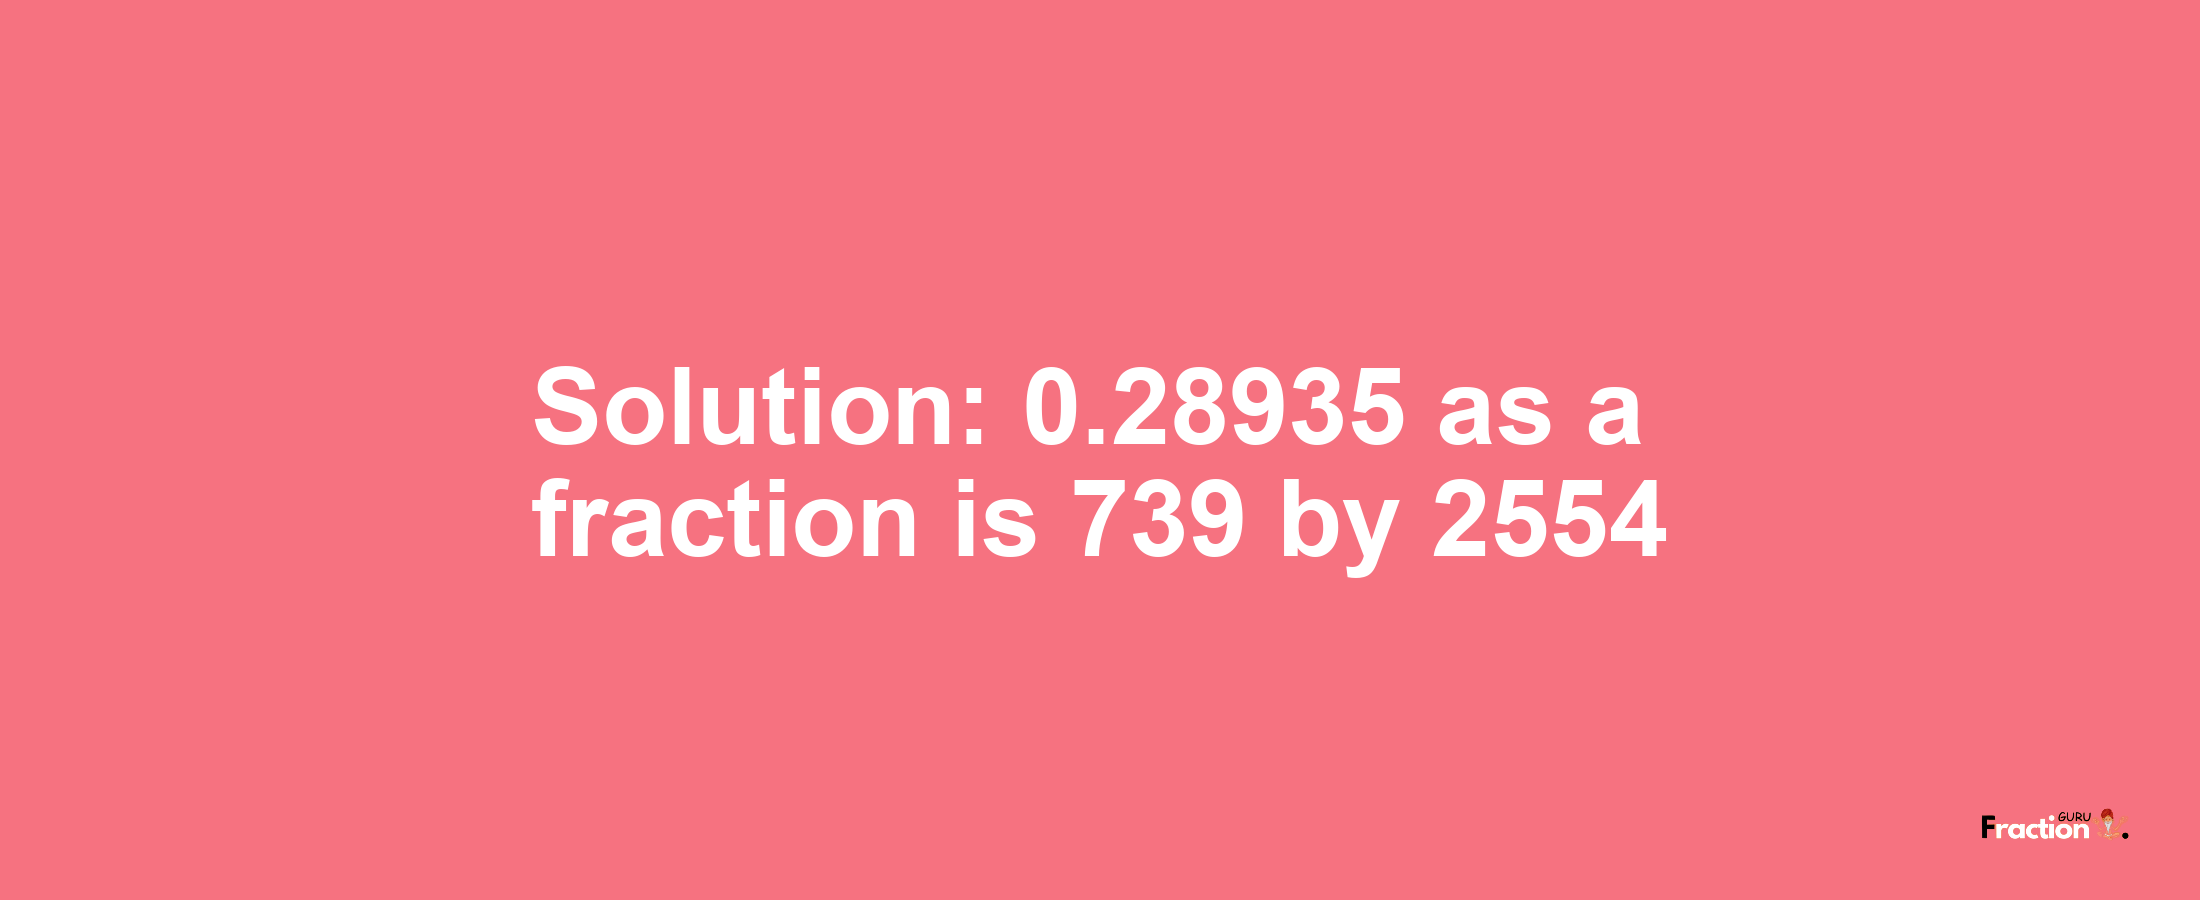 Solution:0.28935 as a fraction is 739/2554